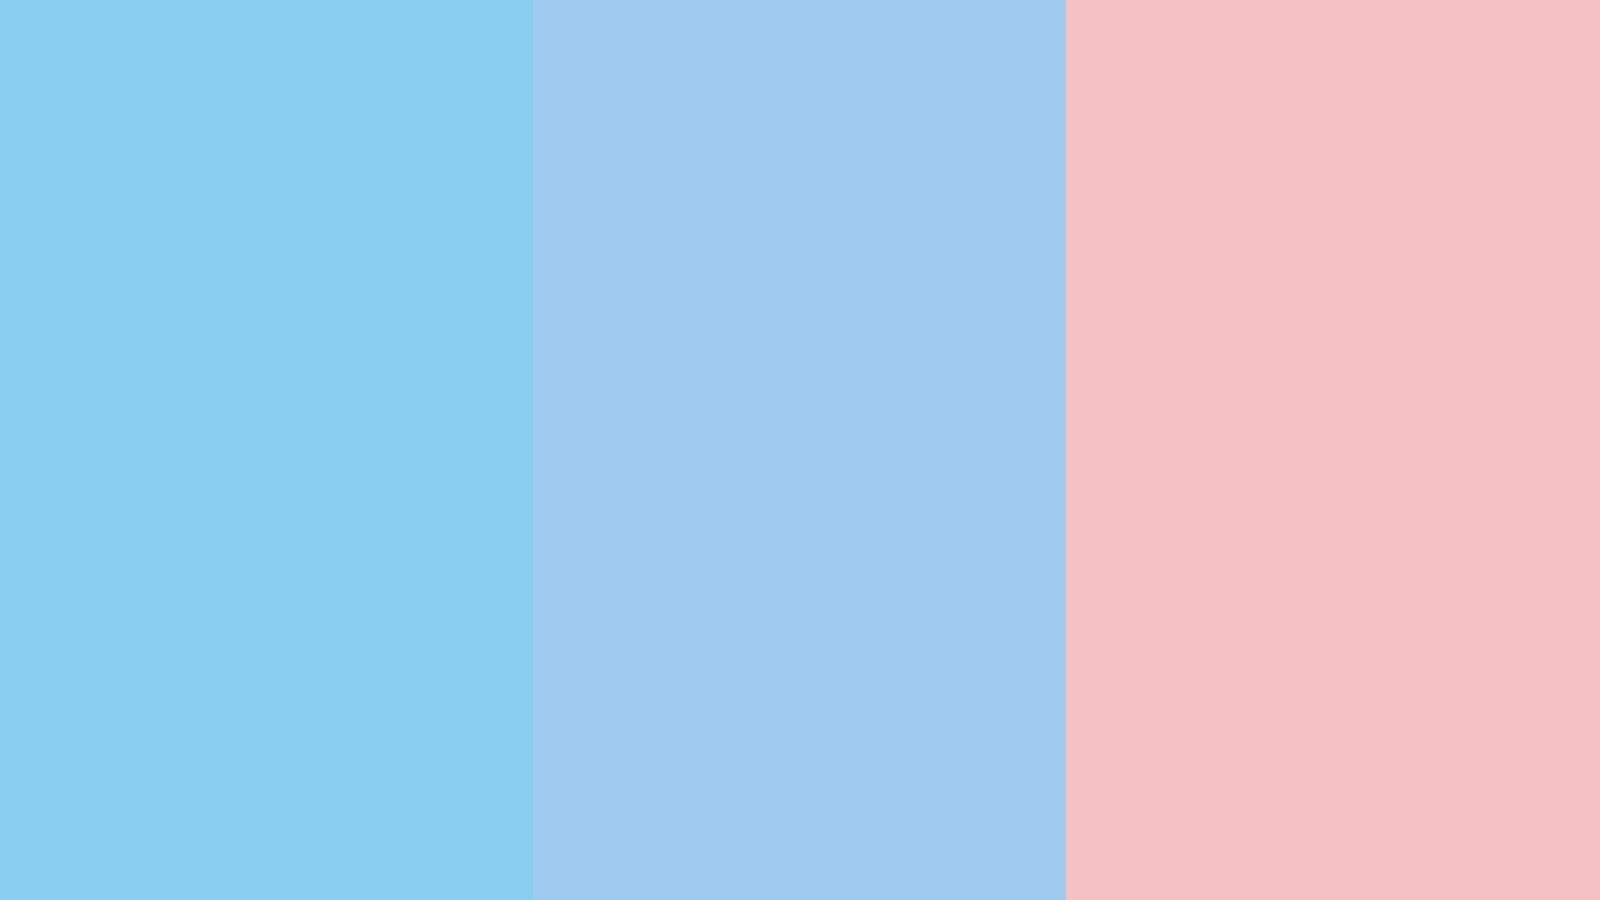  Baby Blue Baby Blue Eyes and Baby Pink Three Color Background